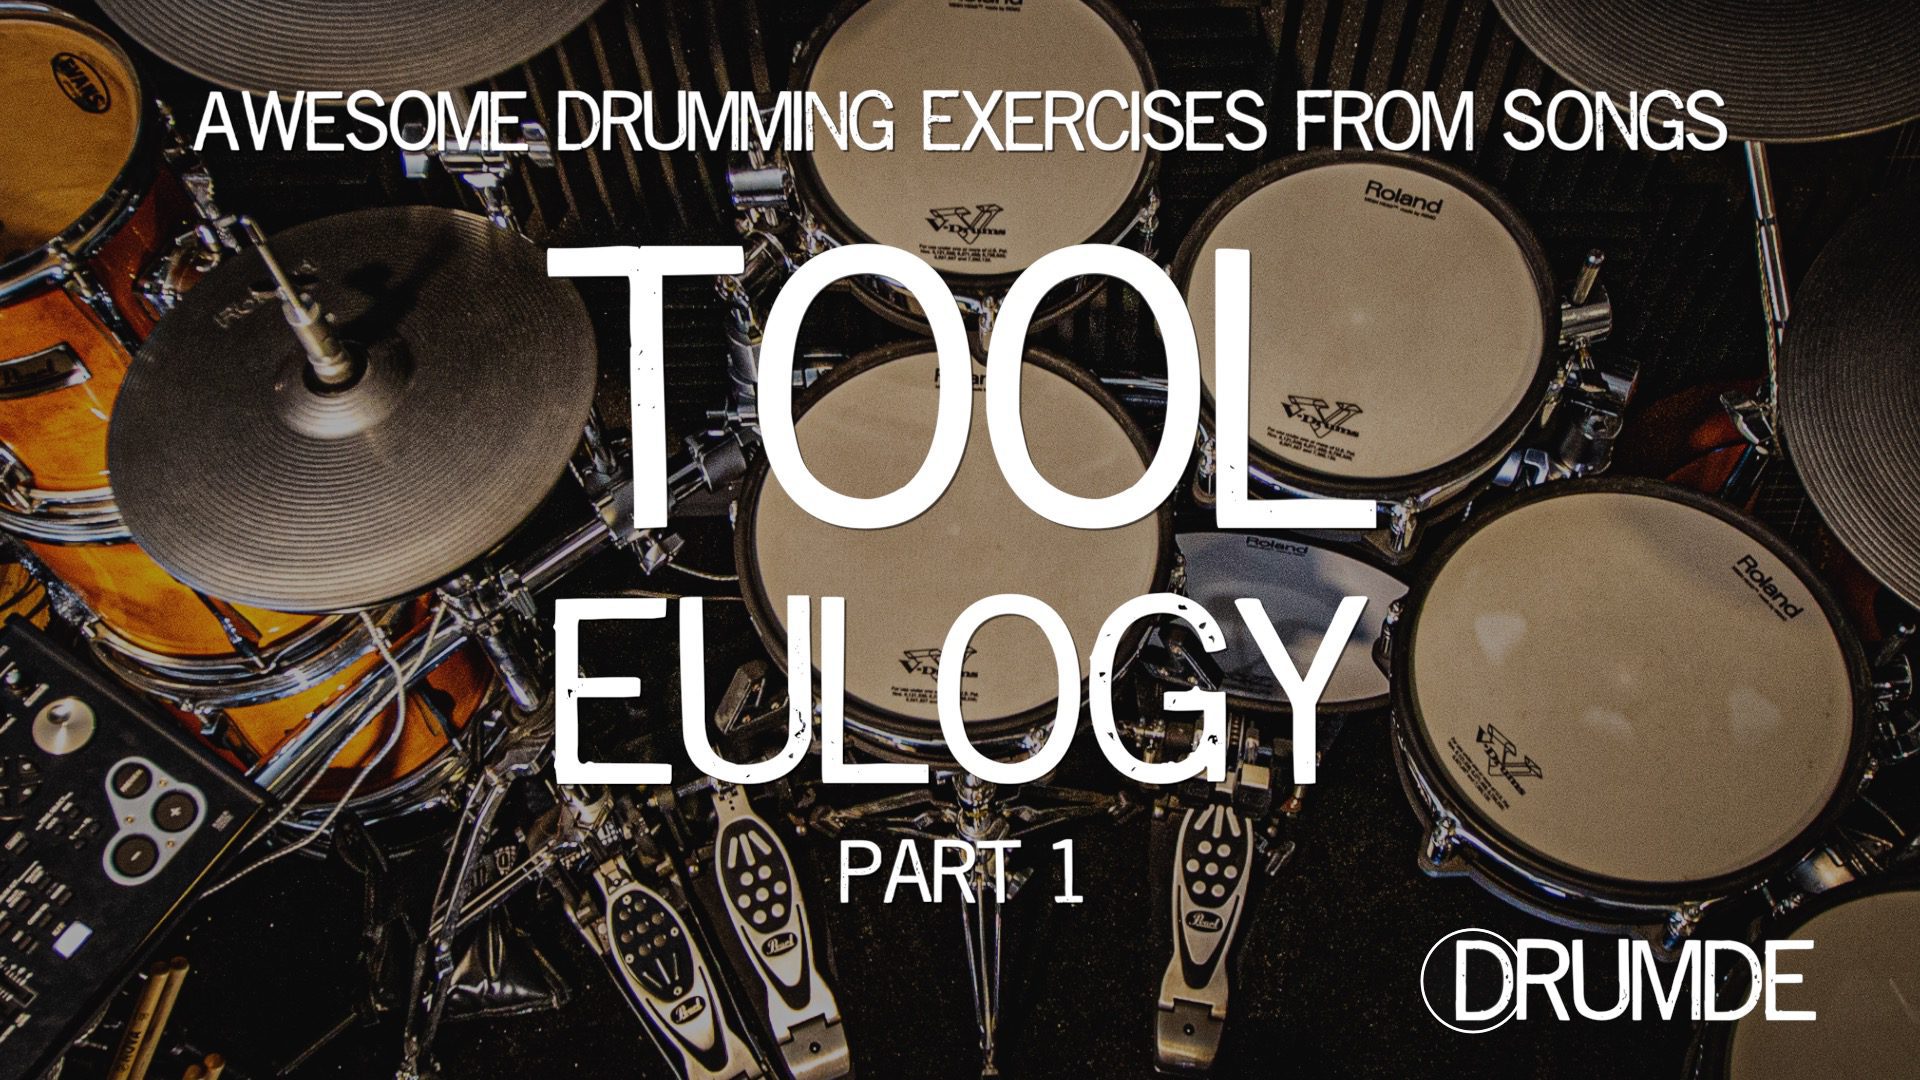 Tool Eulogy Drum Lesson